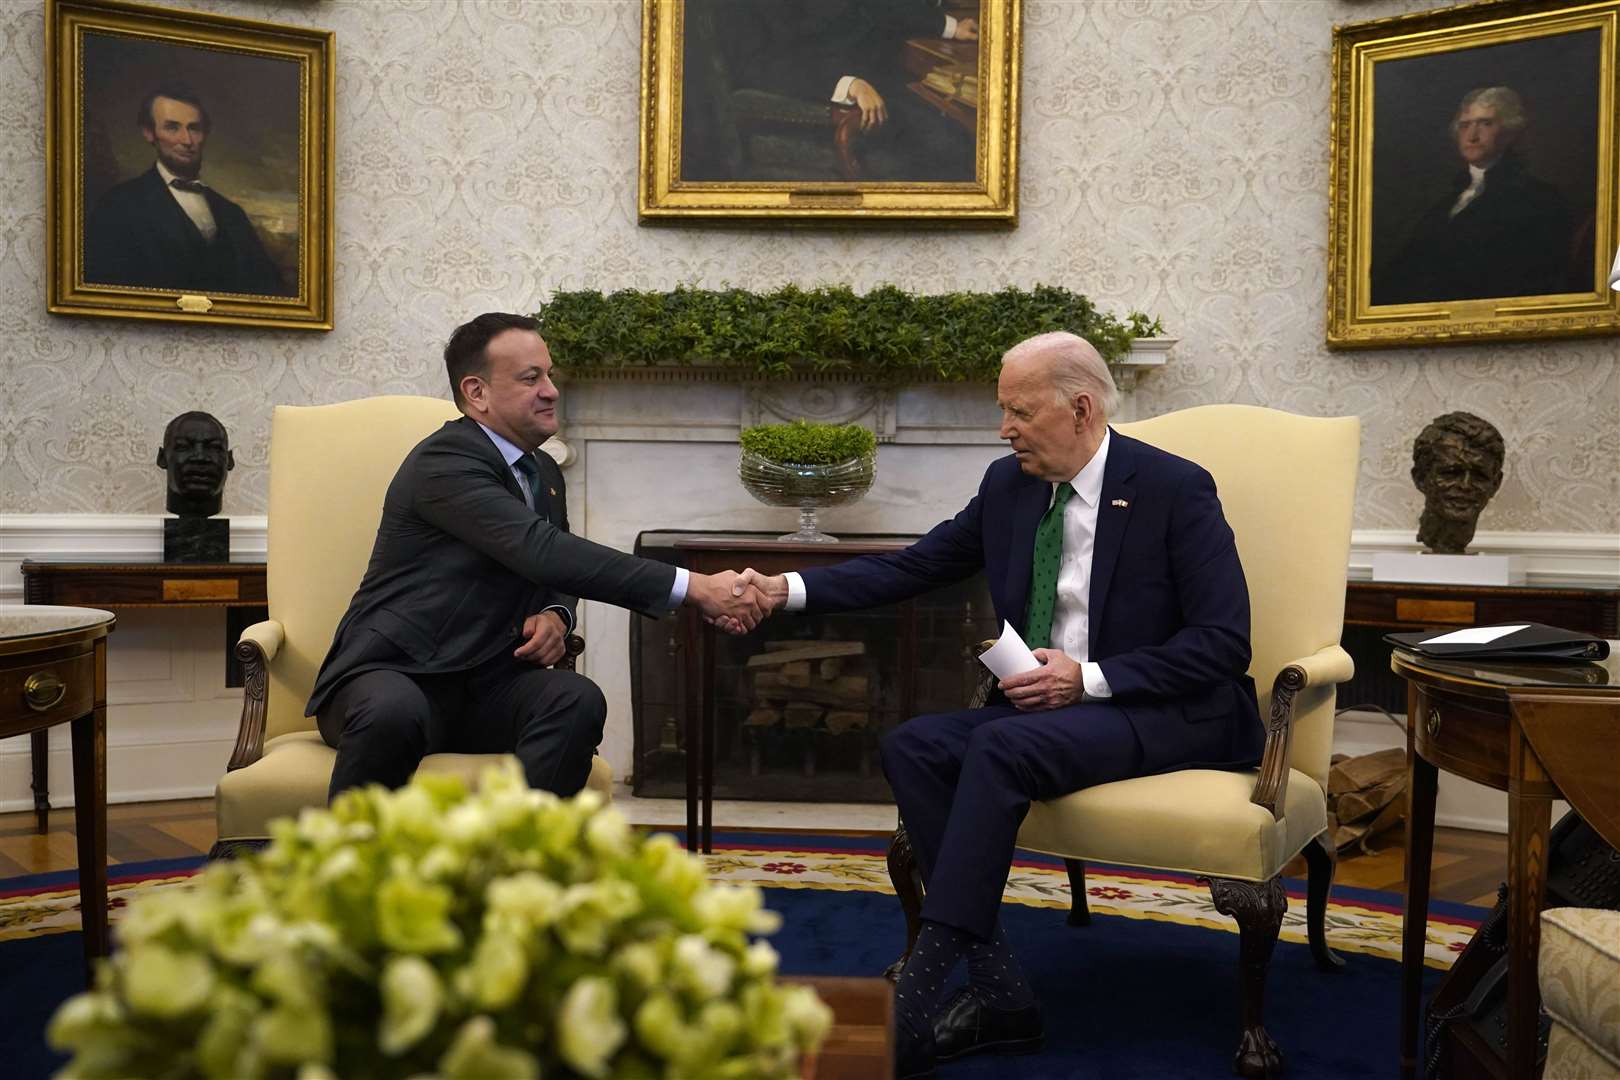 Taoiseach Leo Varadkar (left) at a bilateral meeting with President Joe Biden in the Oval Office at the White House (Niall Carson/PA)